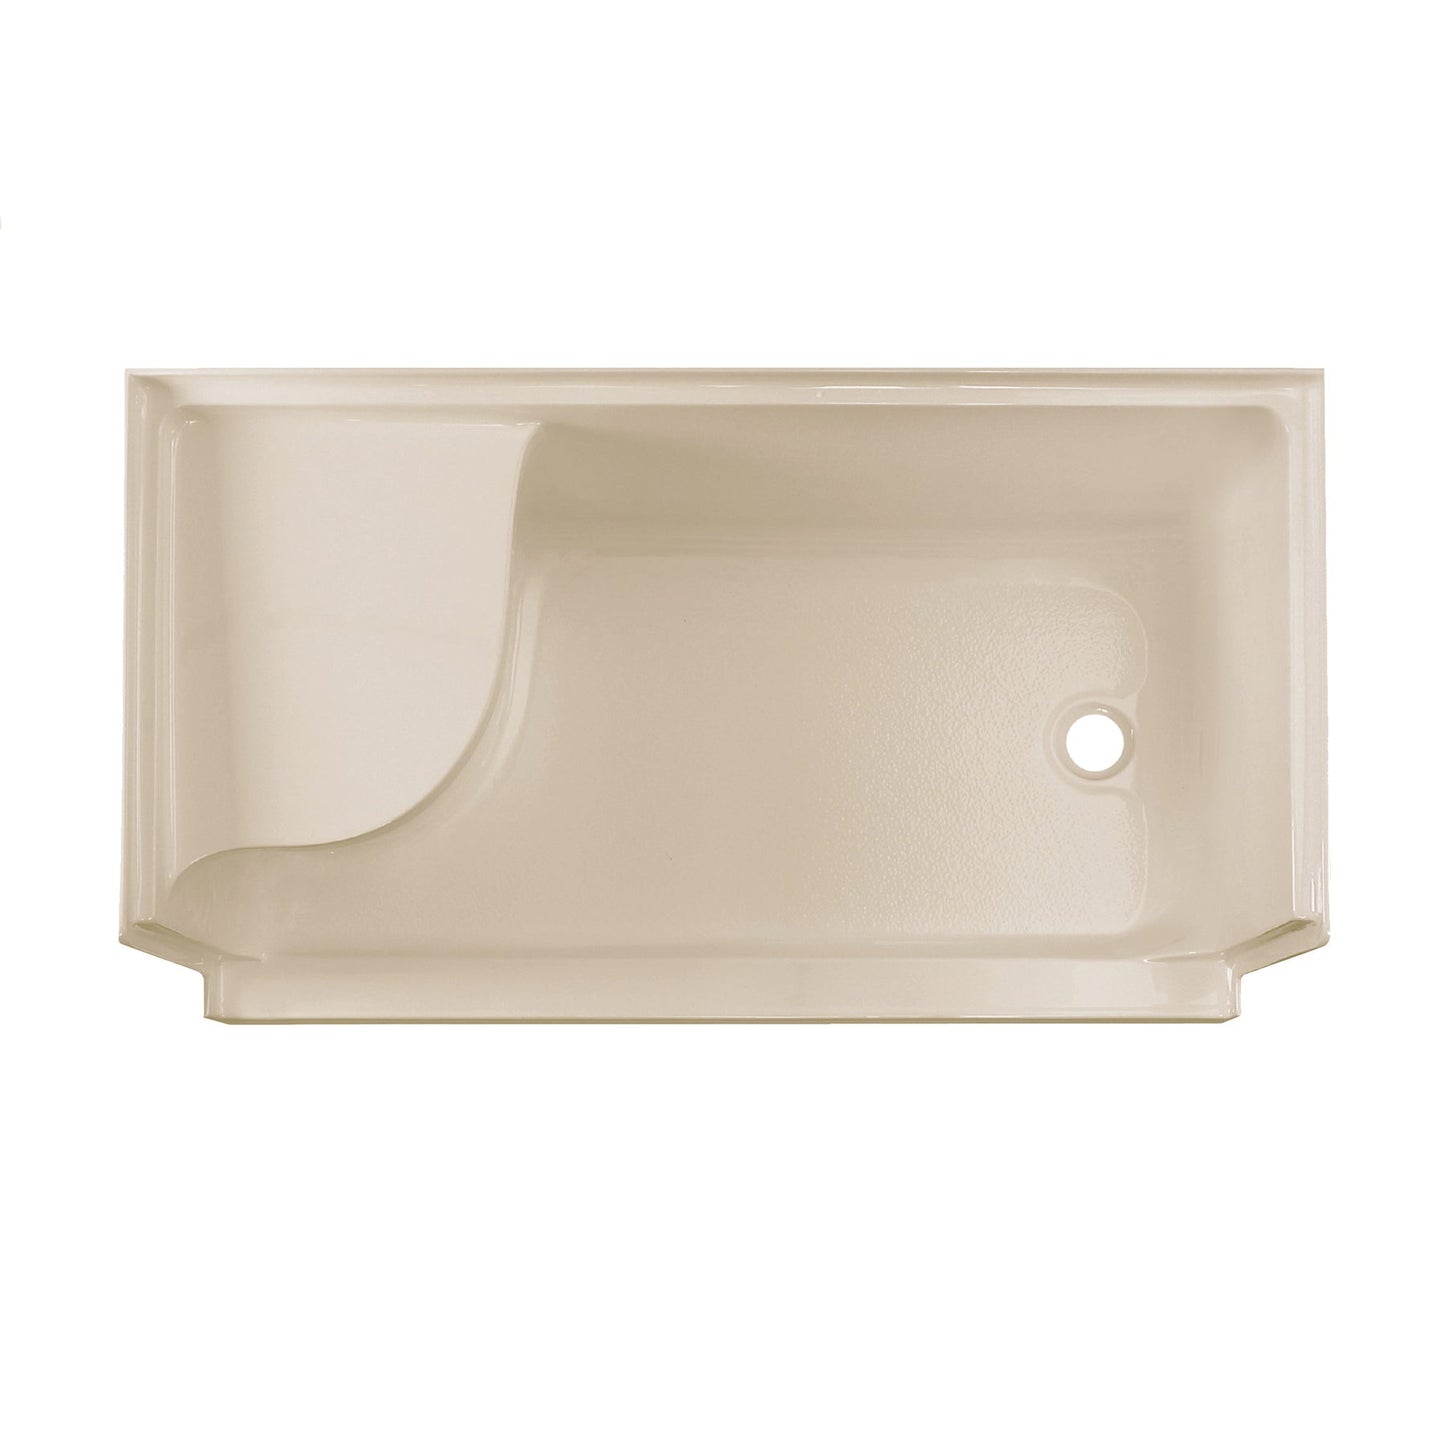 Swiss Madison Aquatique 60" x 32" Three-Wall Alcove Biscuit Right-Hand Drain Seated Shower Base With Built-In Integral Flange and Integrated Seat